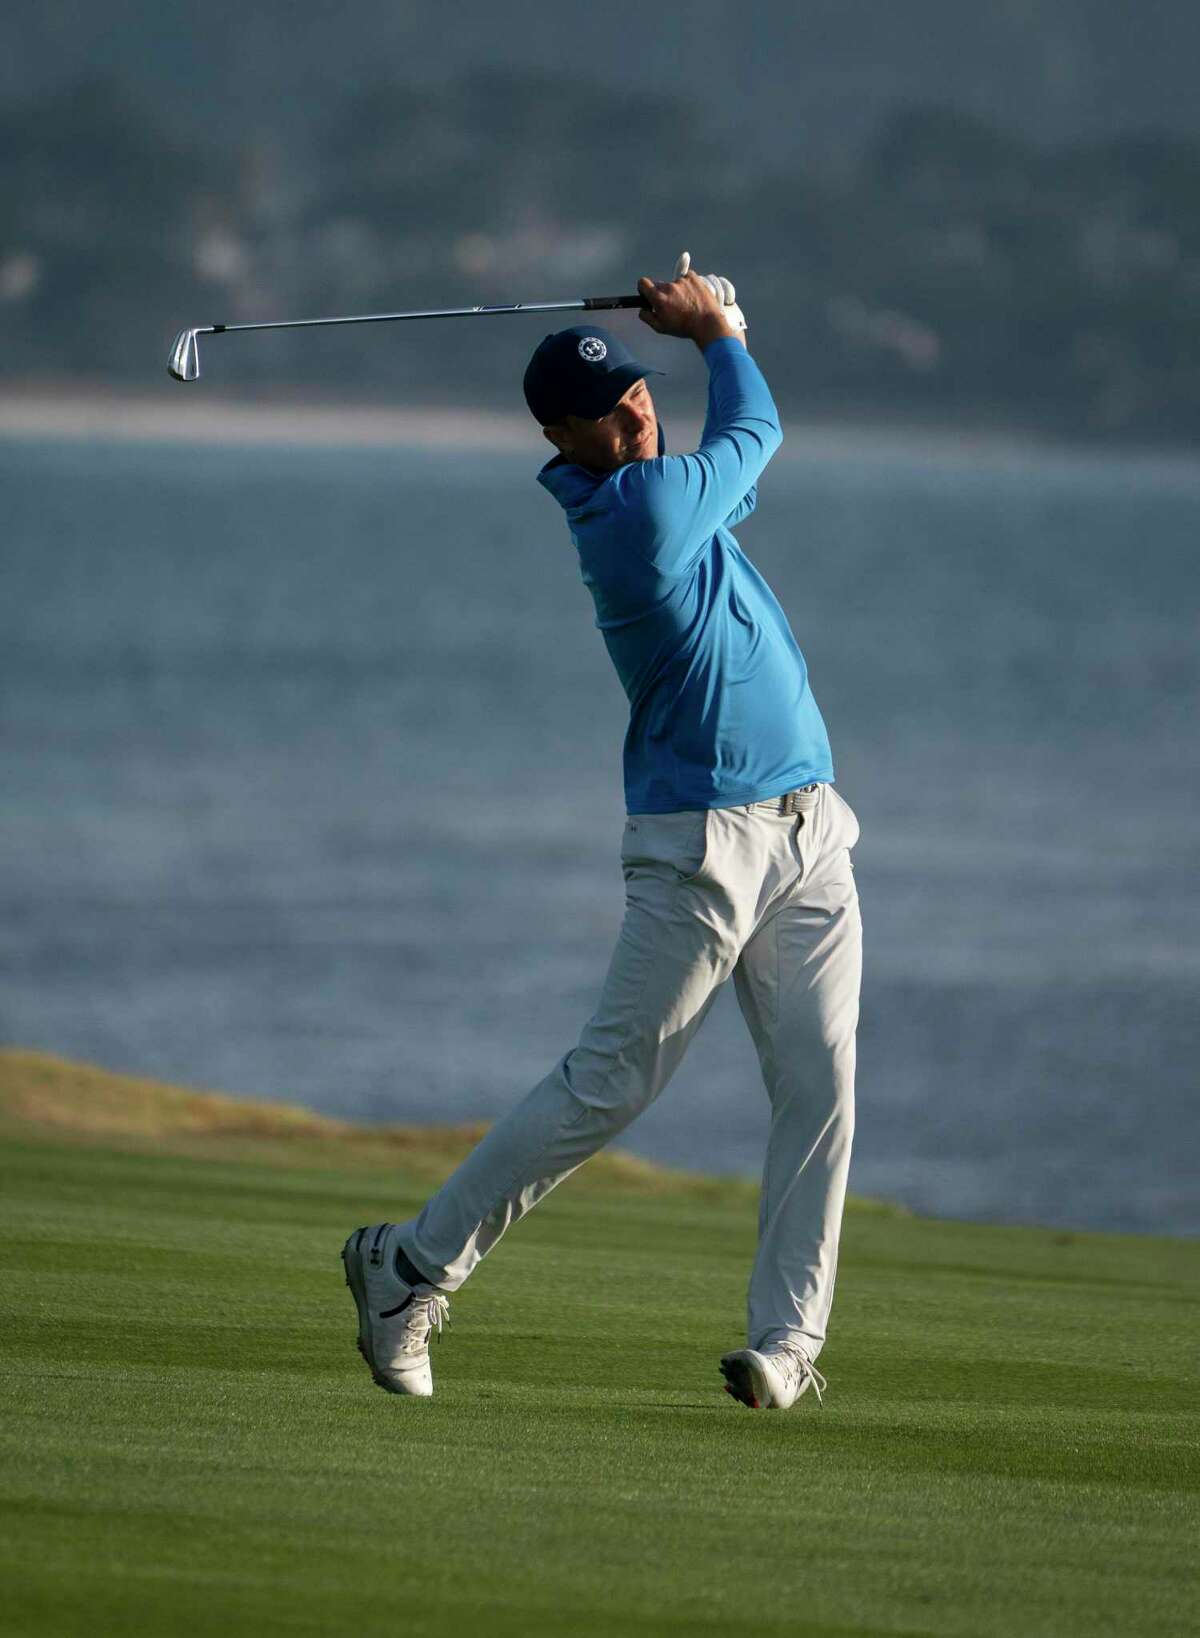 Jordan Spieth drives from the fairway at the 18th hole on the Pebble Beach Golf Links at the AT&T Pebble Beach Pro-Am on Saturday, Feb. 5, 2022 in Pebble Beach, Calif.